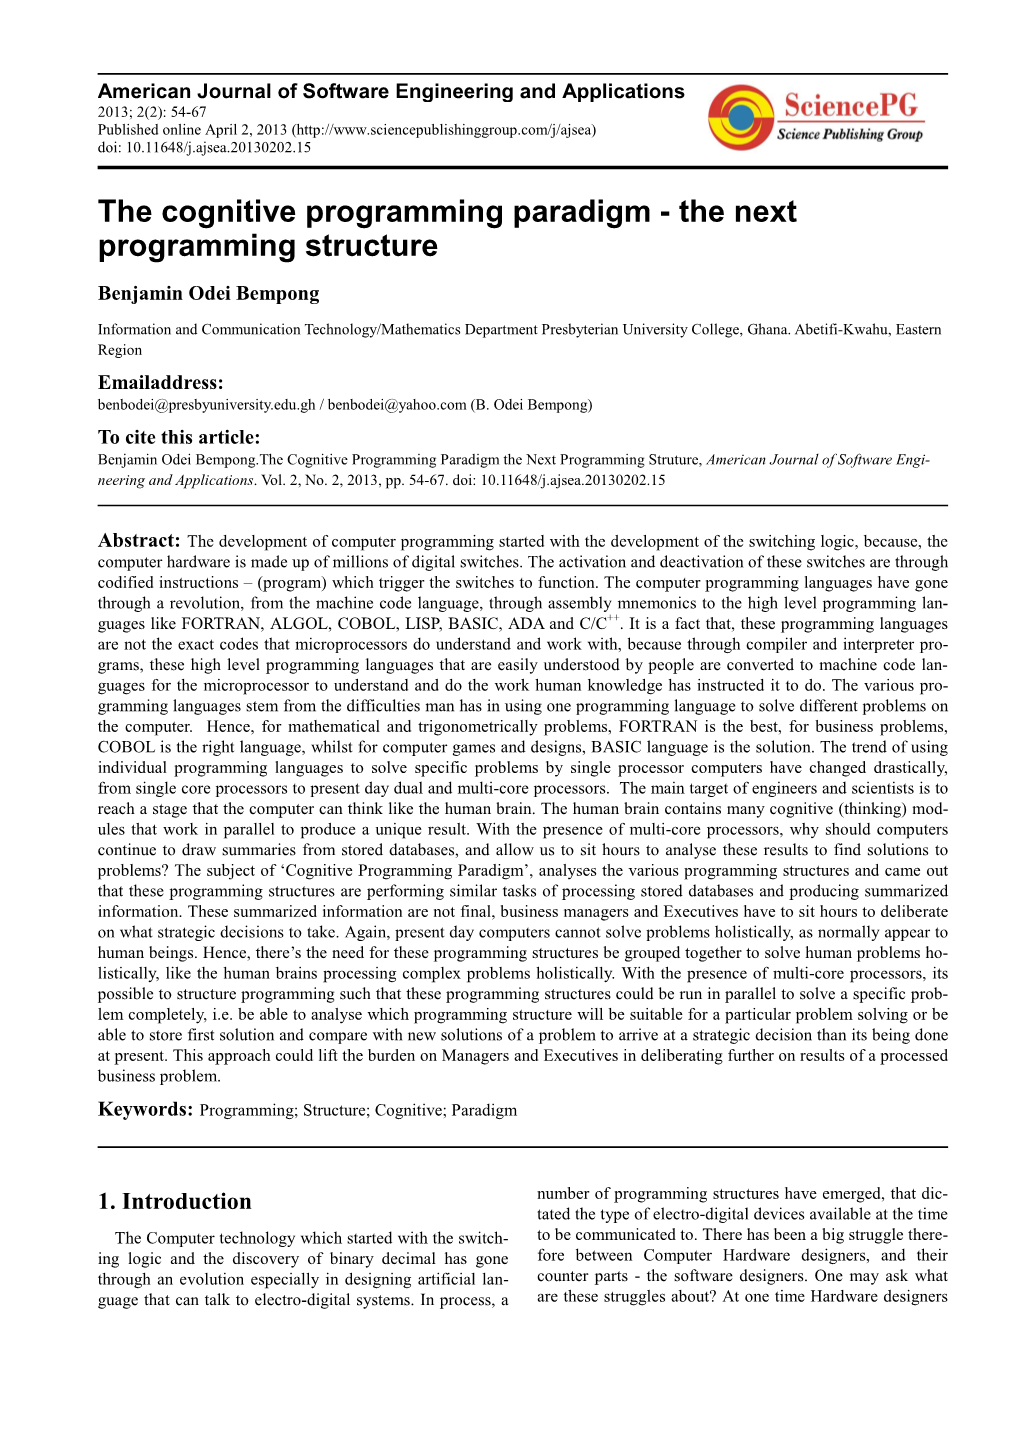 The Cognitive Programming Paradigm - the Next Programming Structure